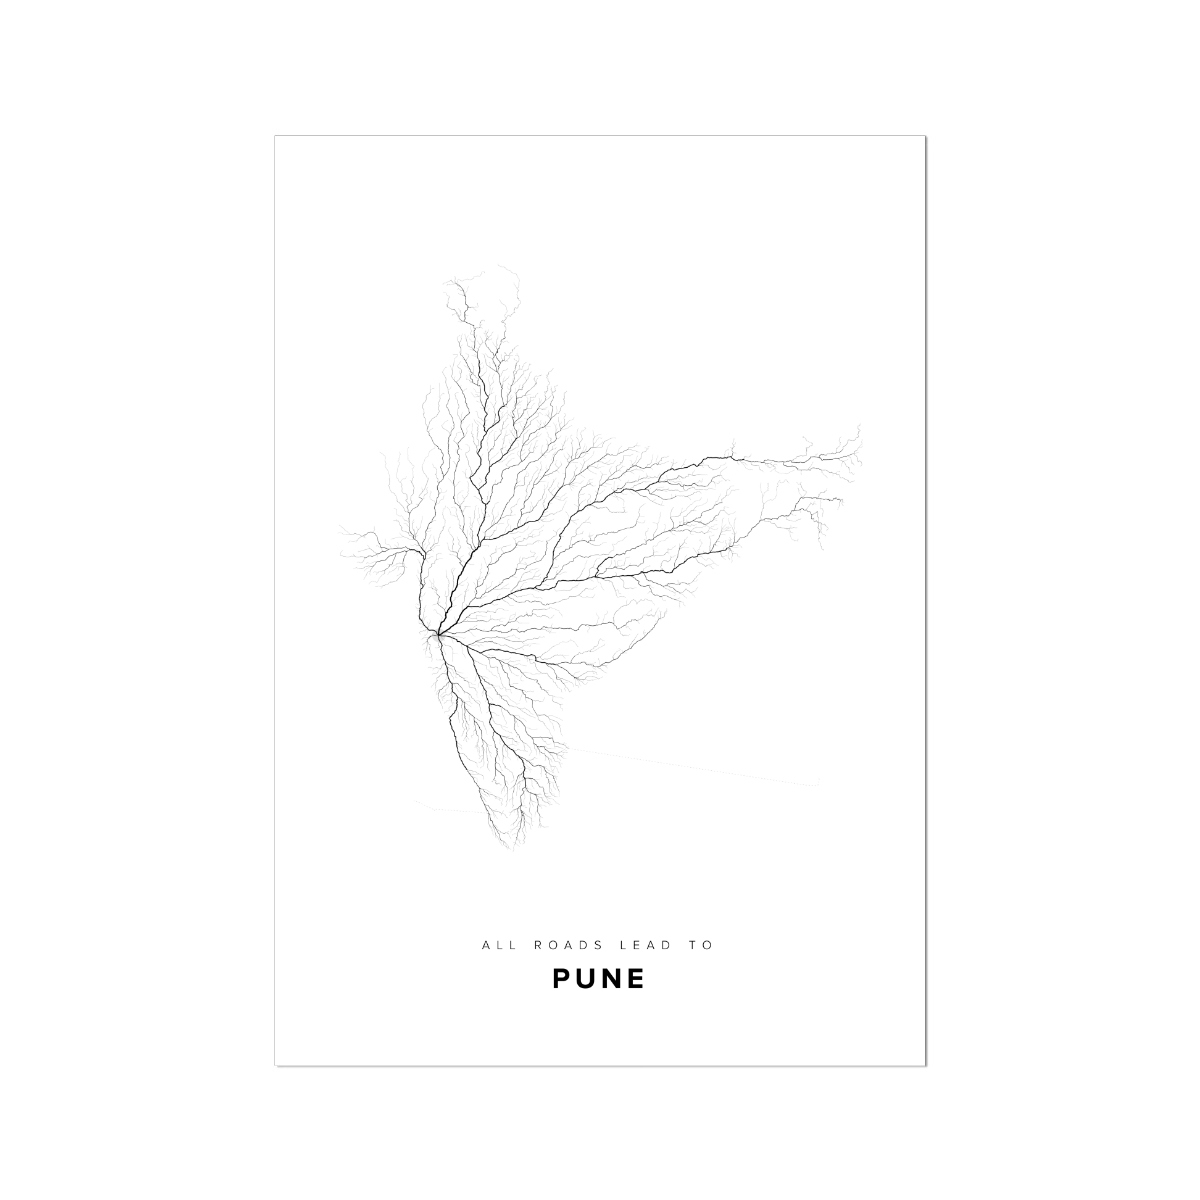 All roads lead to Pune (India) Fine Art Map Print